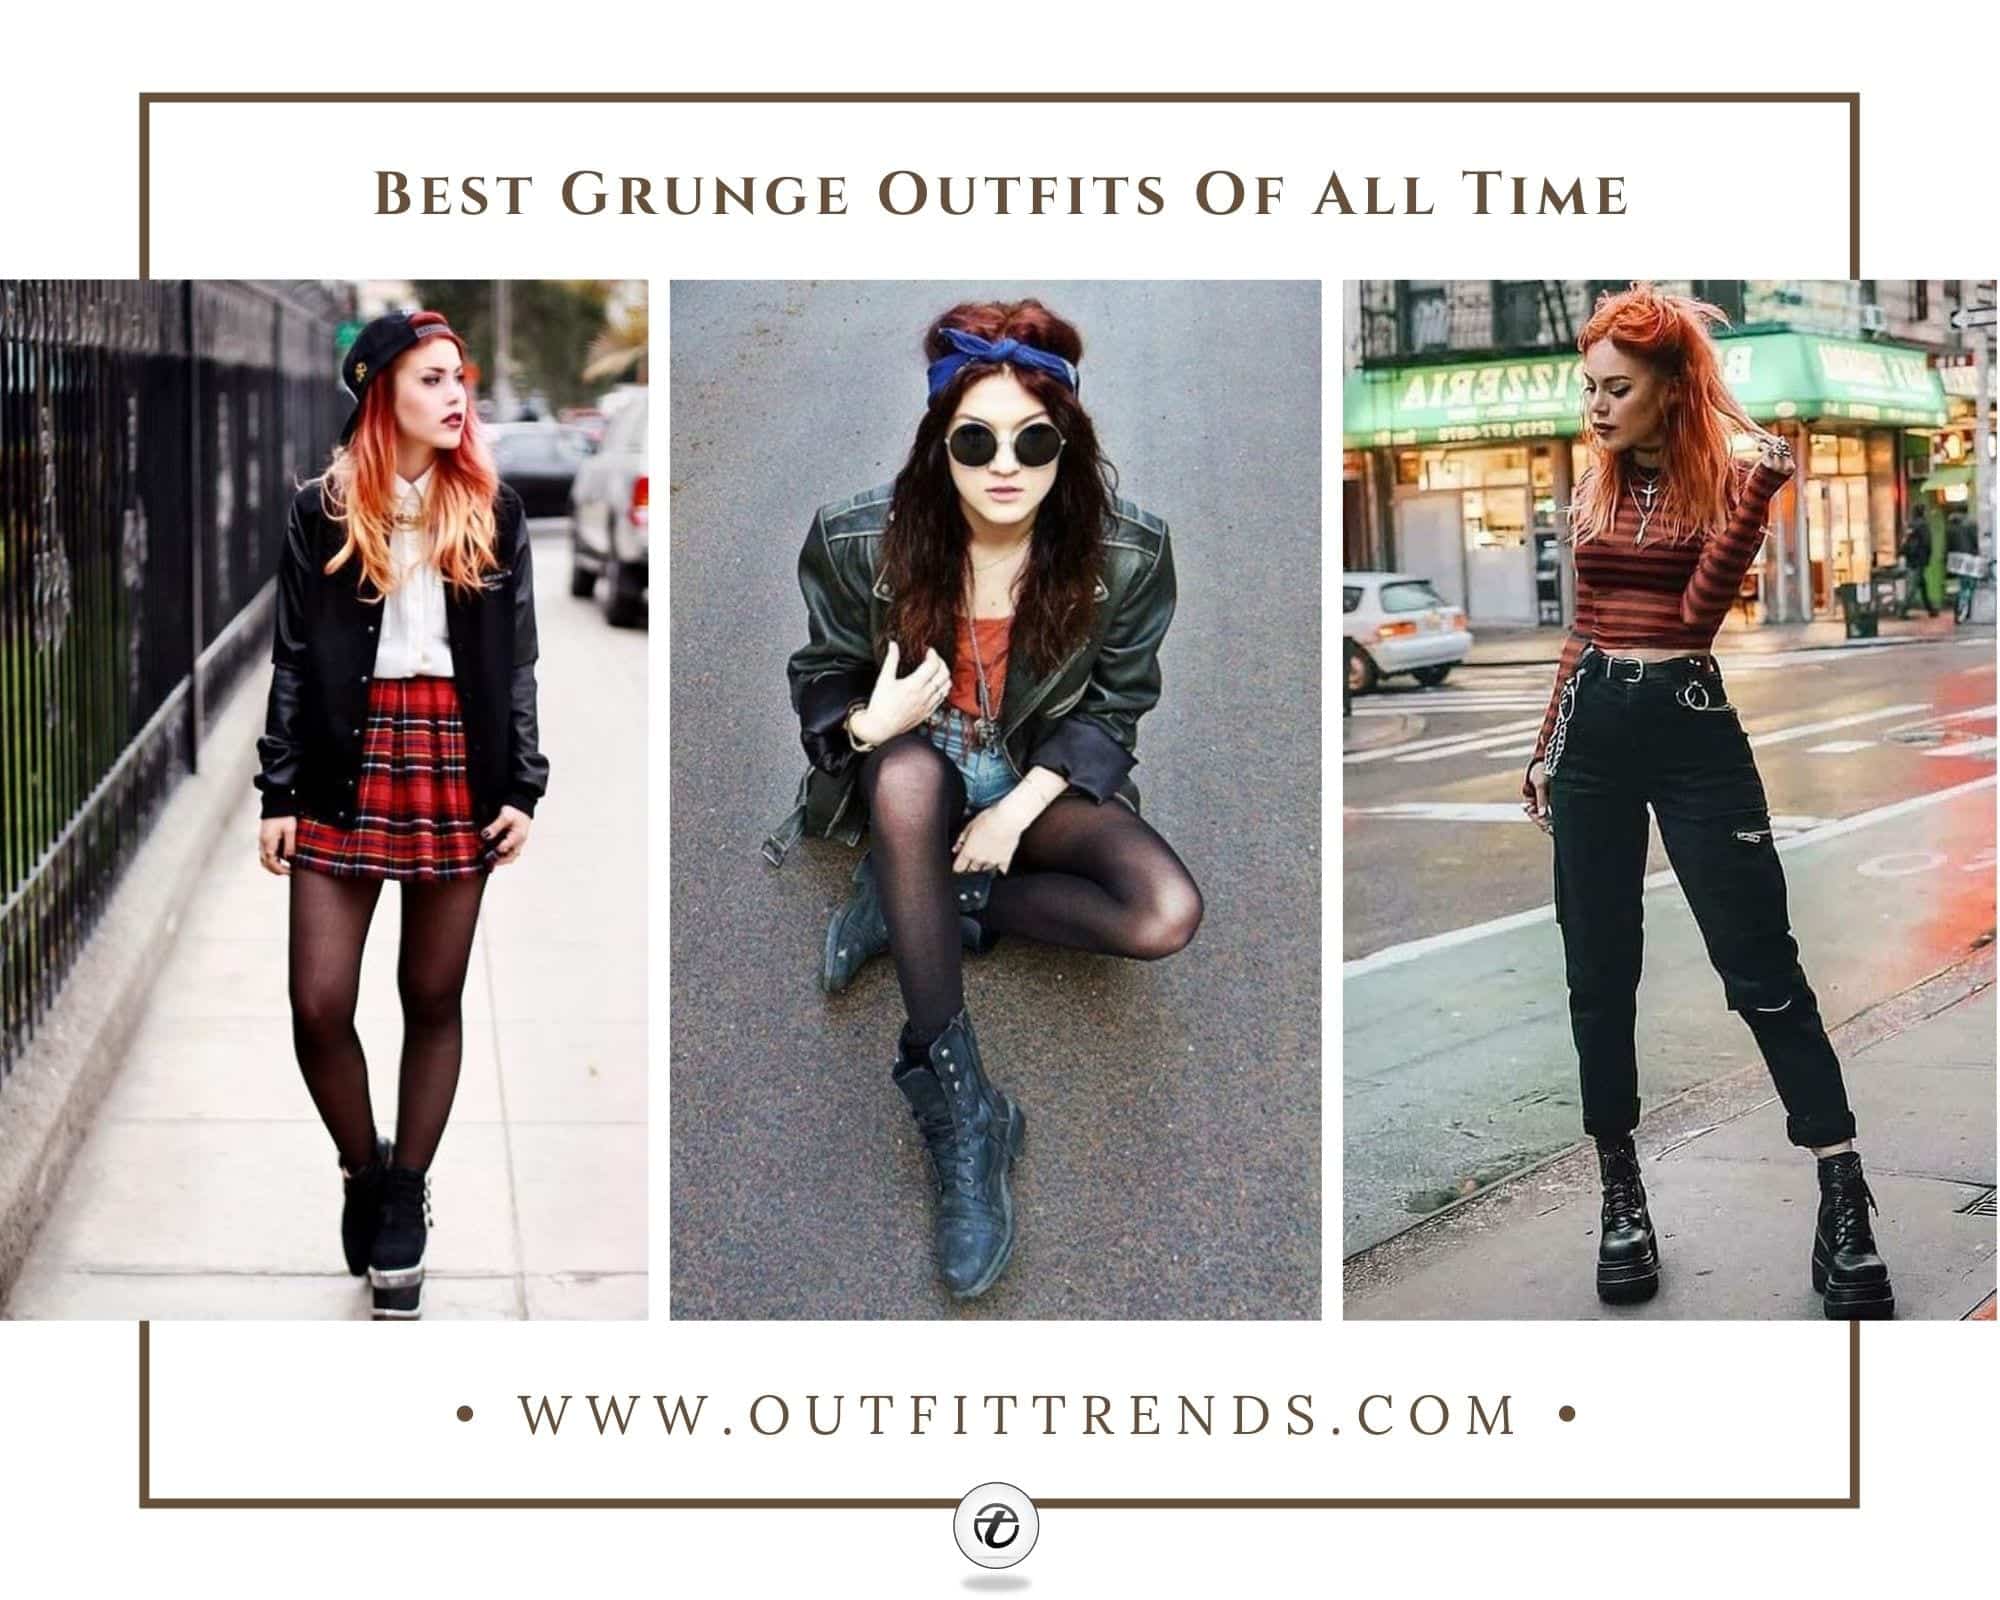 30 Grunge Outfits for Girls To Try – How to Dress Grunge?